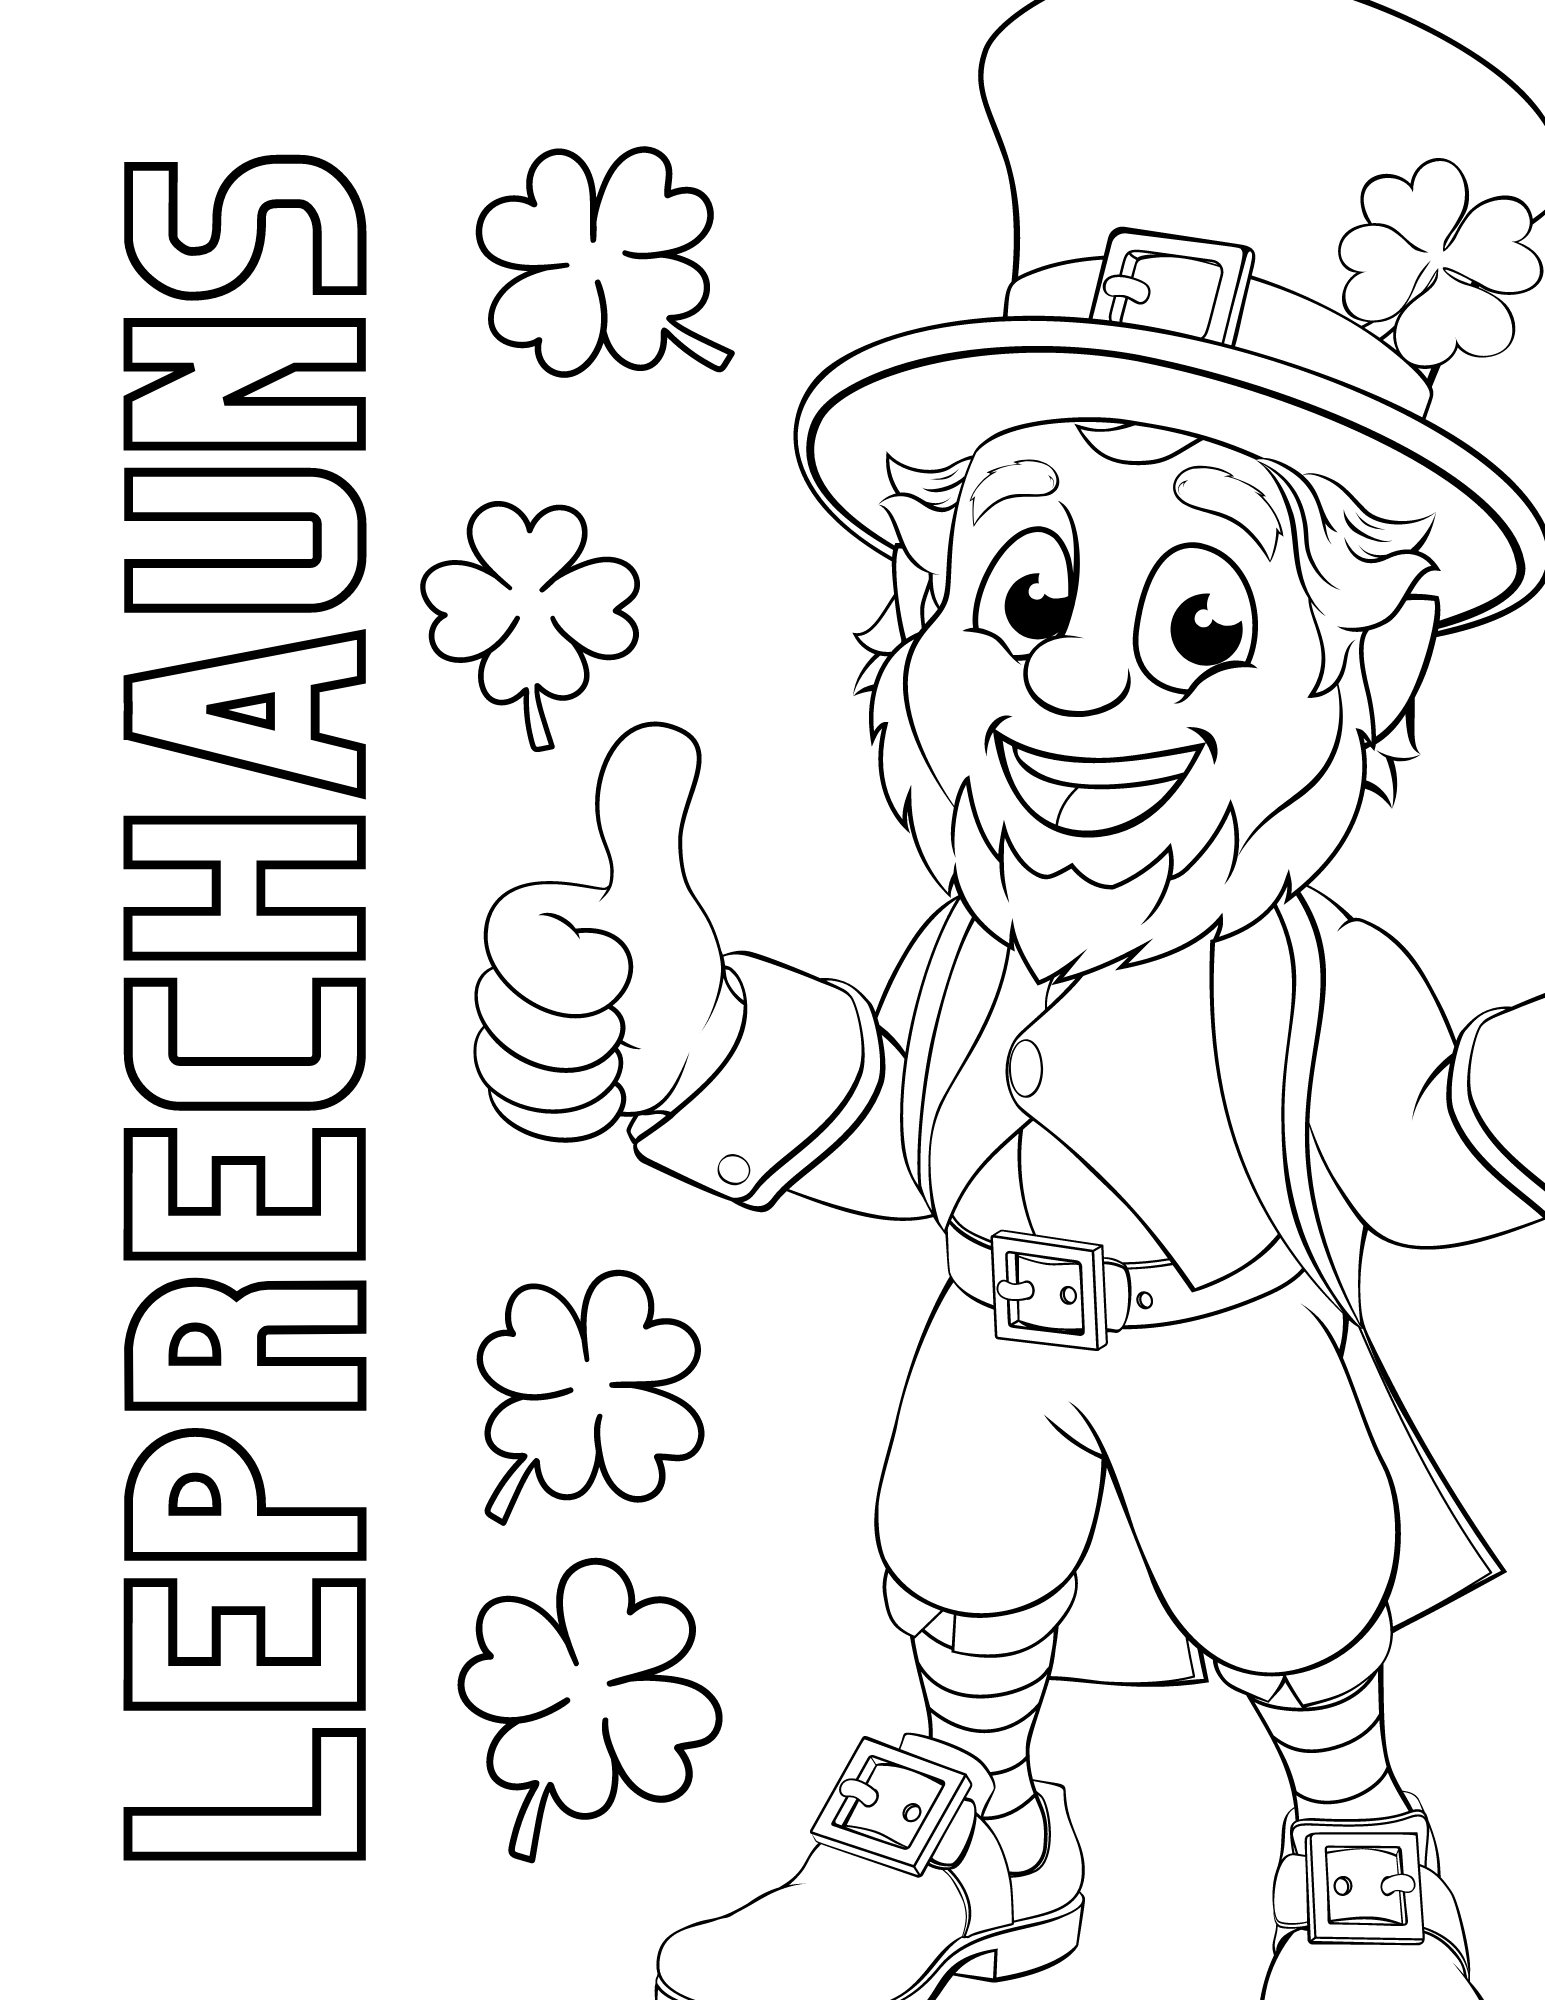 Free printable leprechaun coloring pages for kids and adults